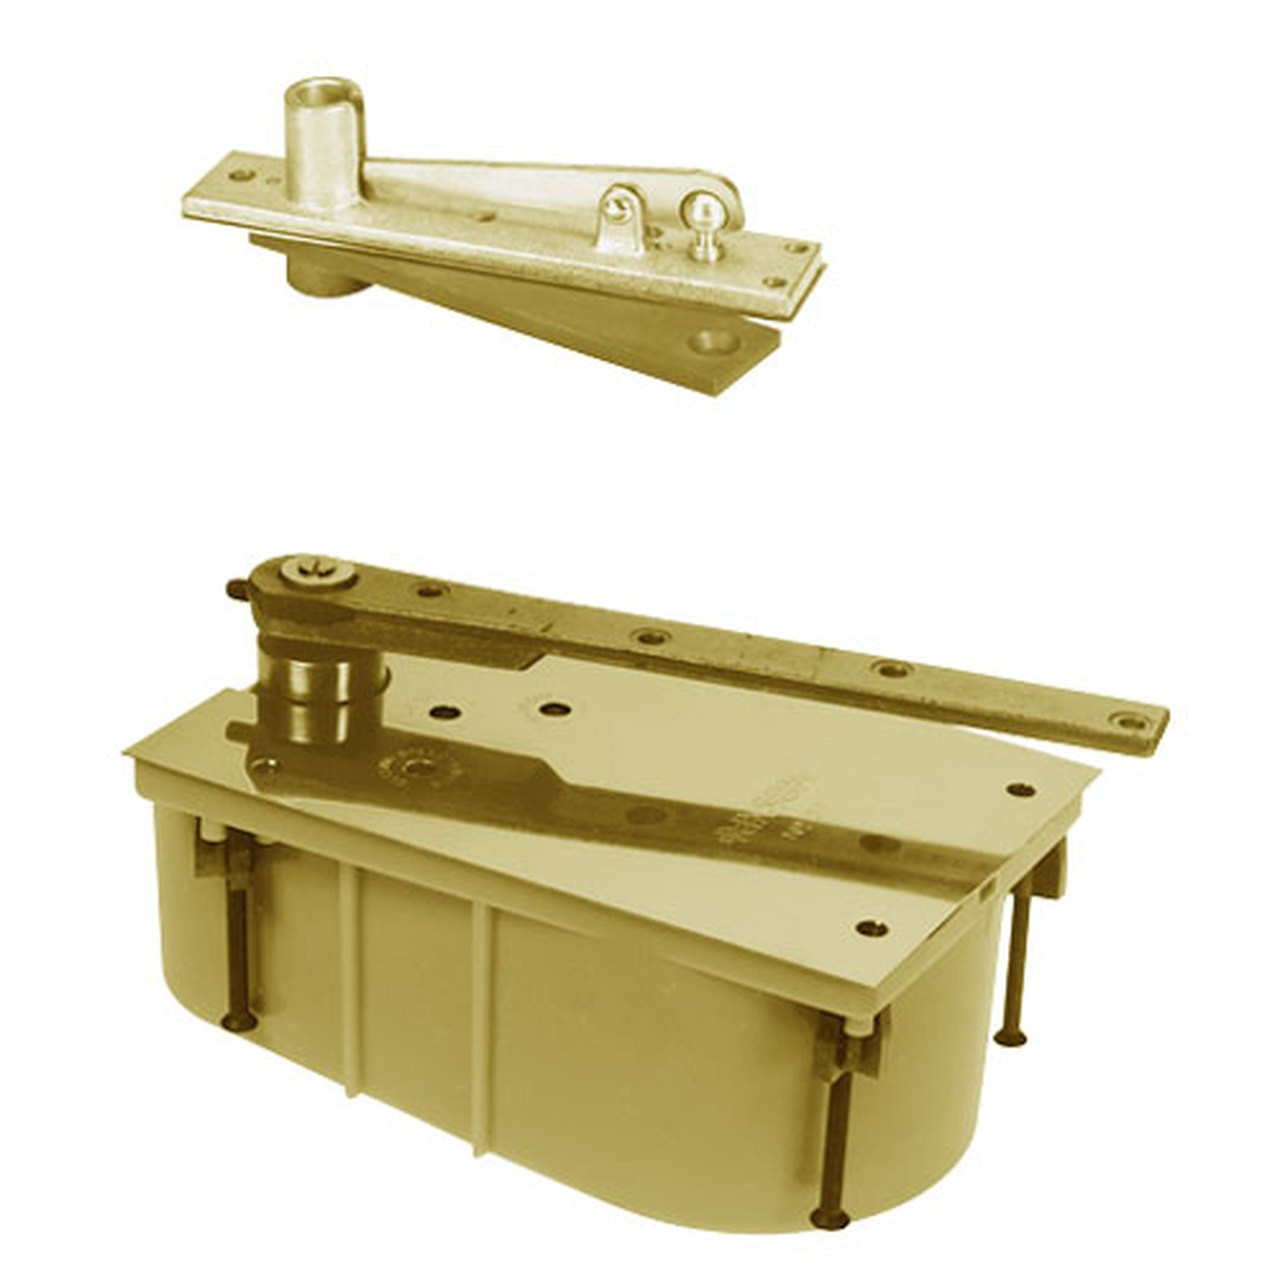 28-90S-554-LFP-LCC-LH-606 Rixson 28 Series Heavy Duty Single Acting Center Hung Floor Closer with Concealed Arm in Satin Brass Finish